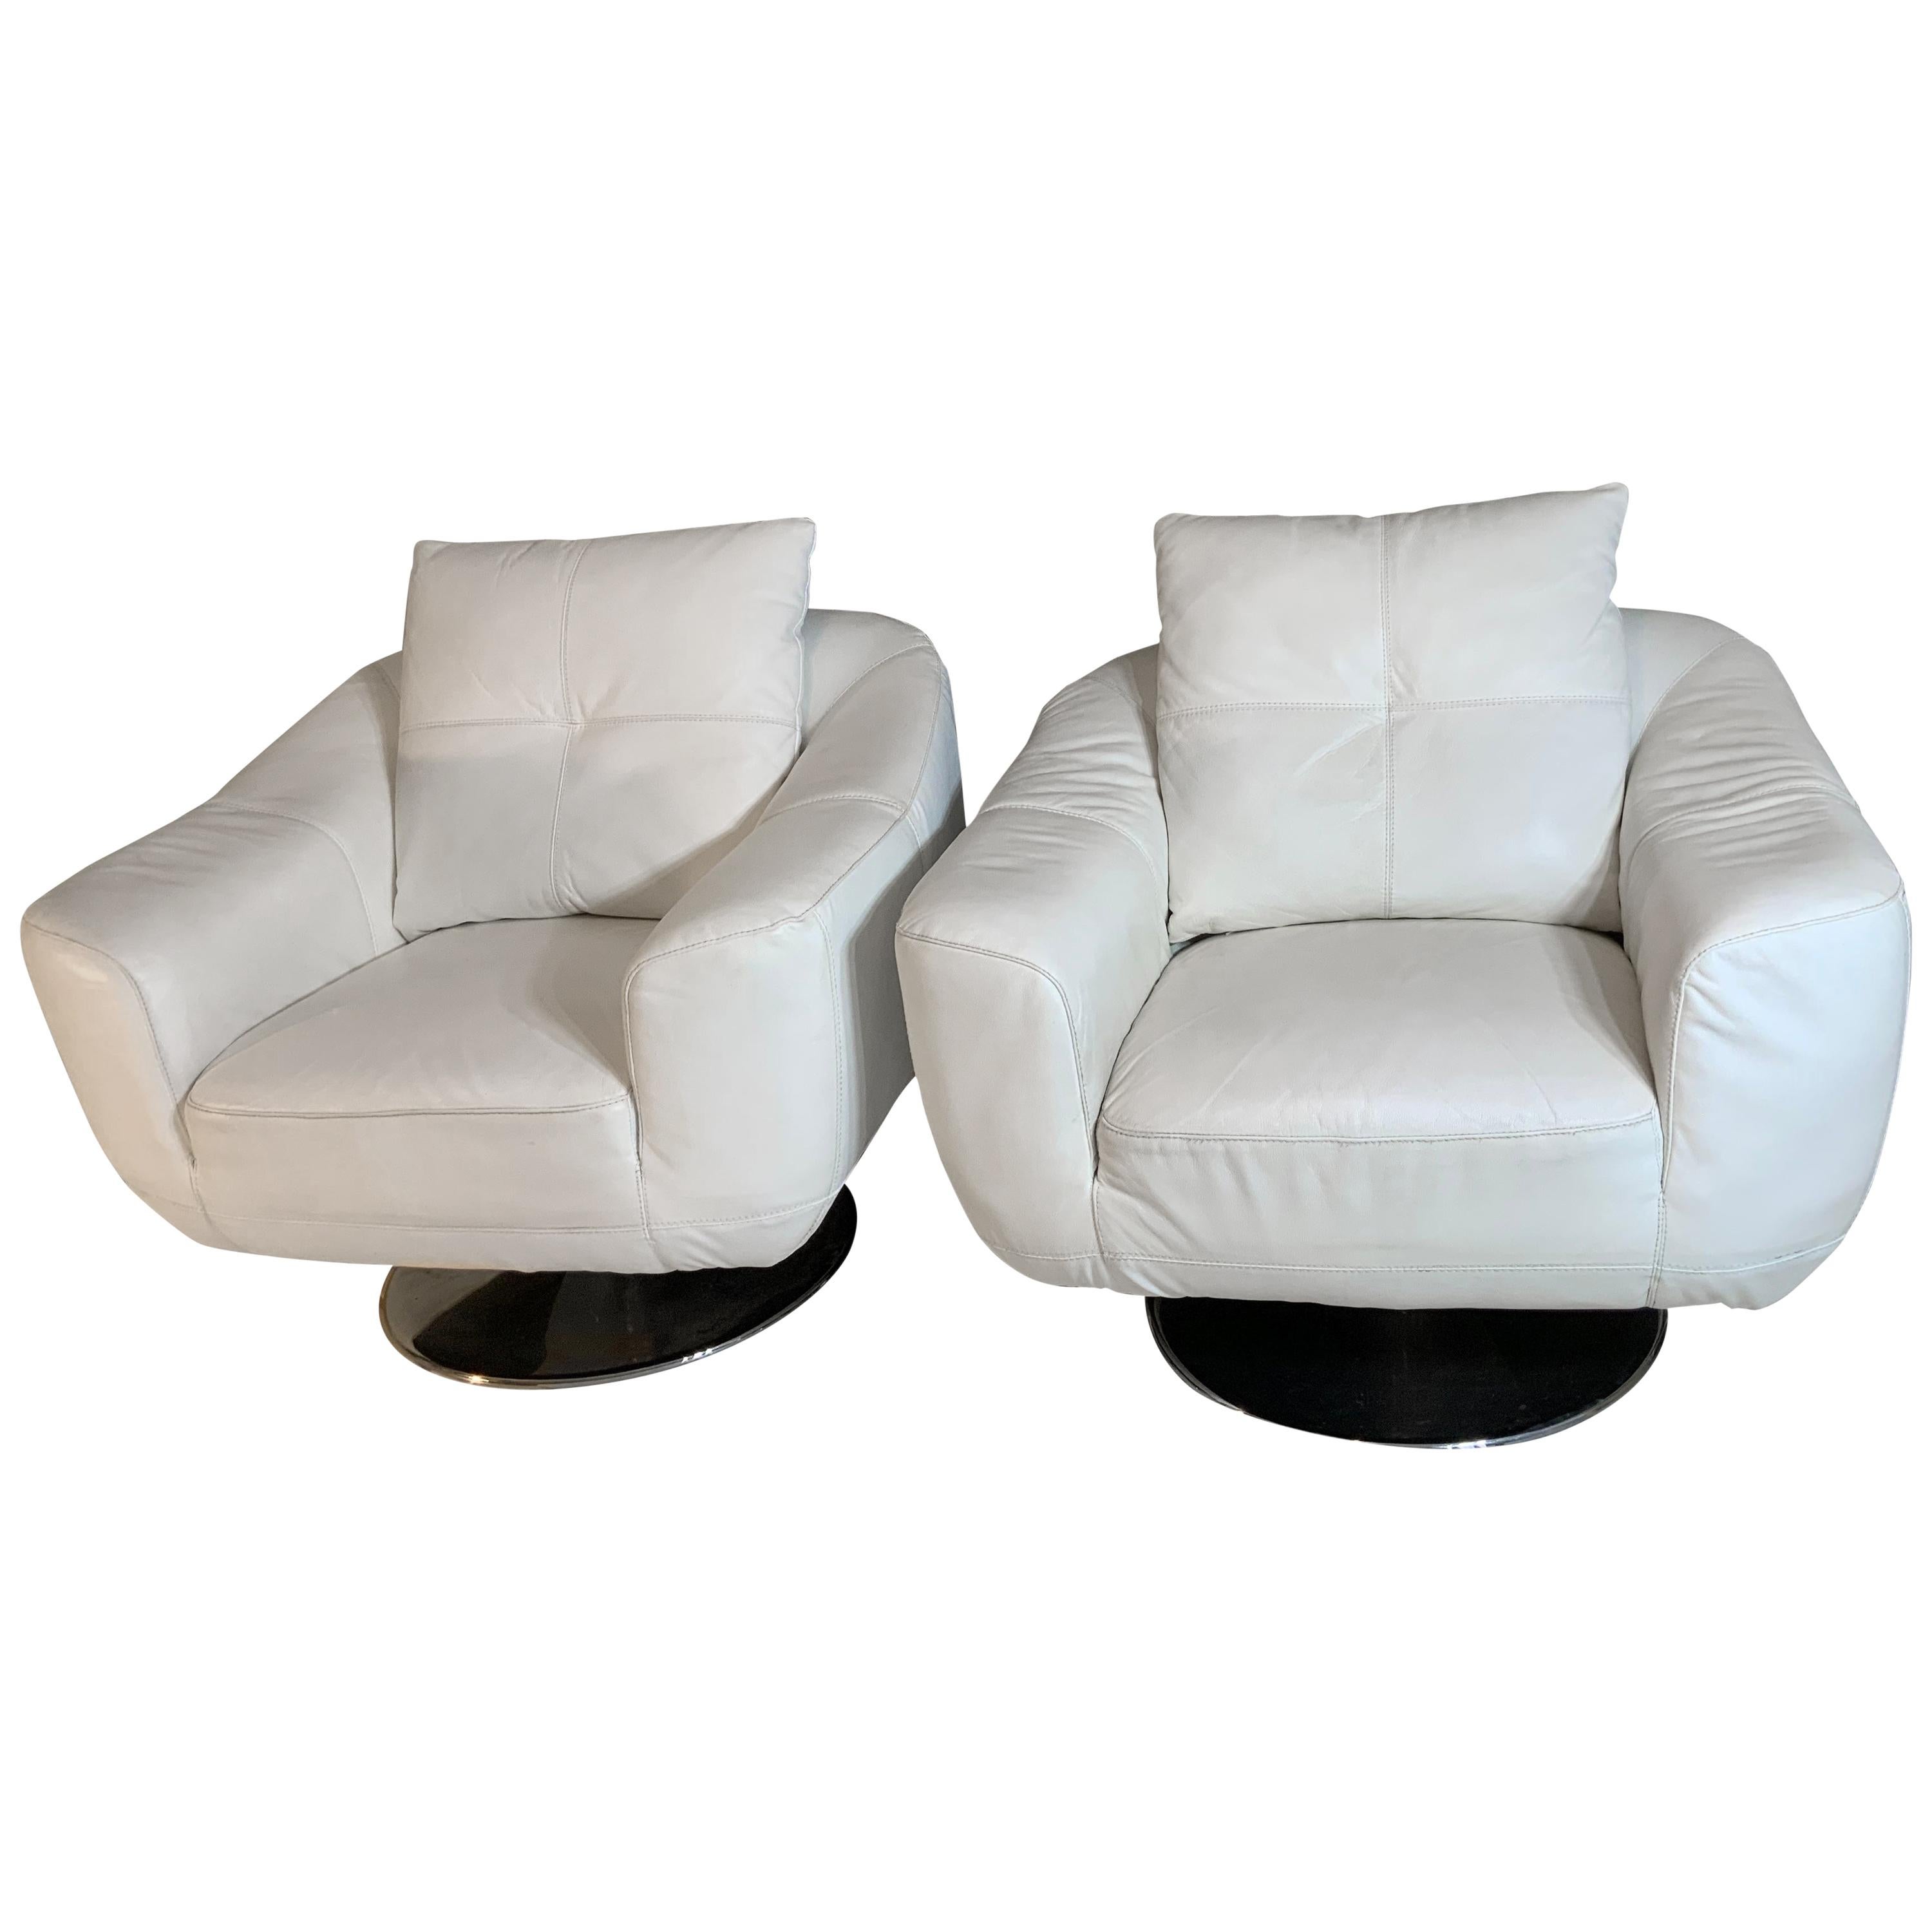 White Faux Leather Swivel Chairs, White Faux Leather Recliners